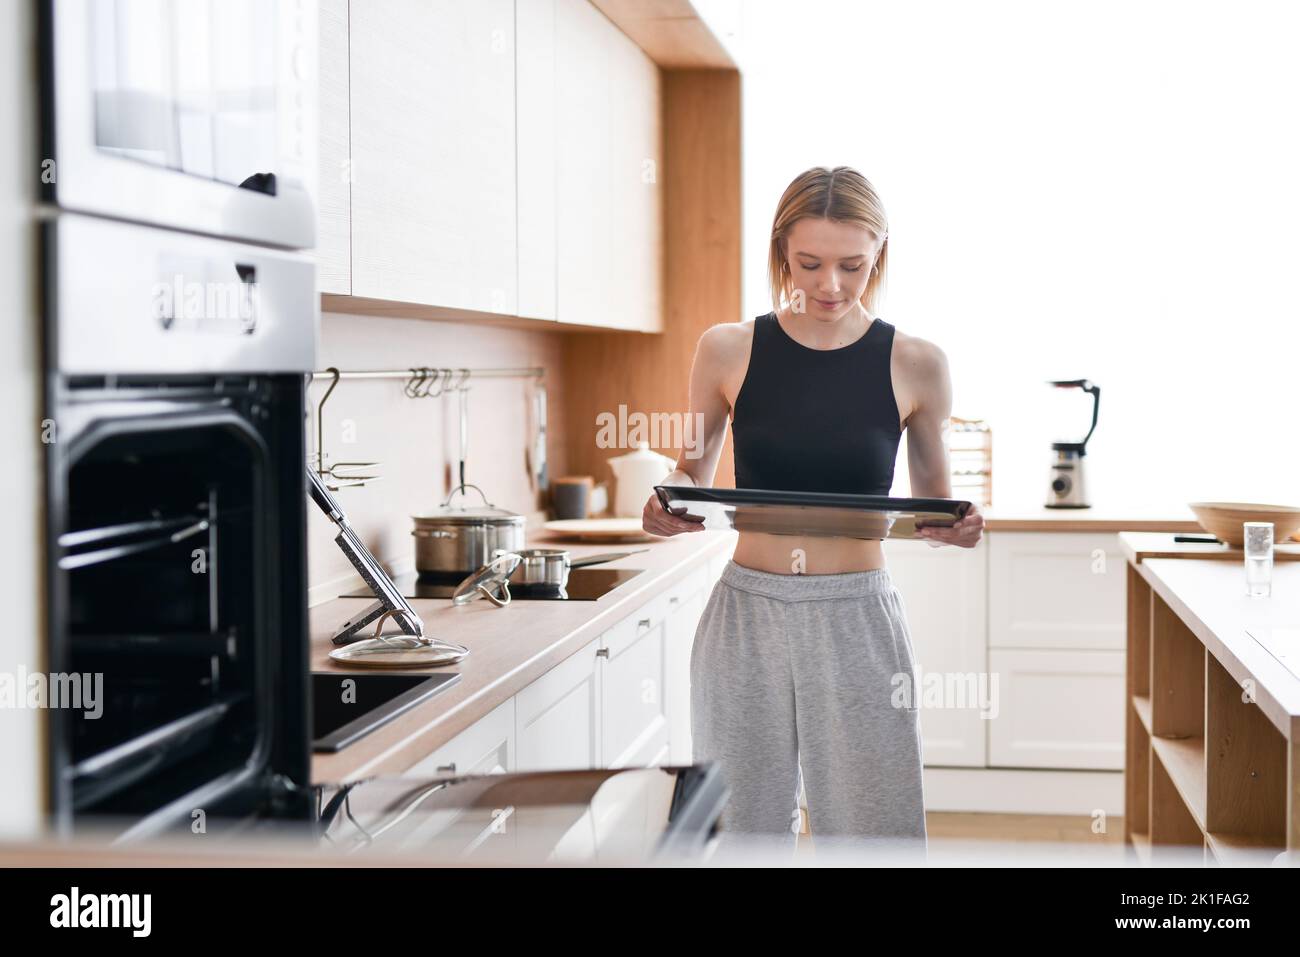 Woman carries tray to put in oven for baking. Stock Photo